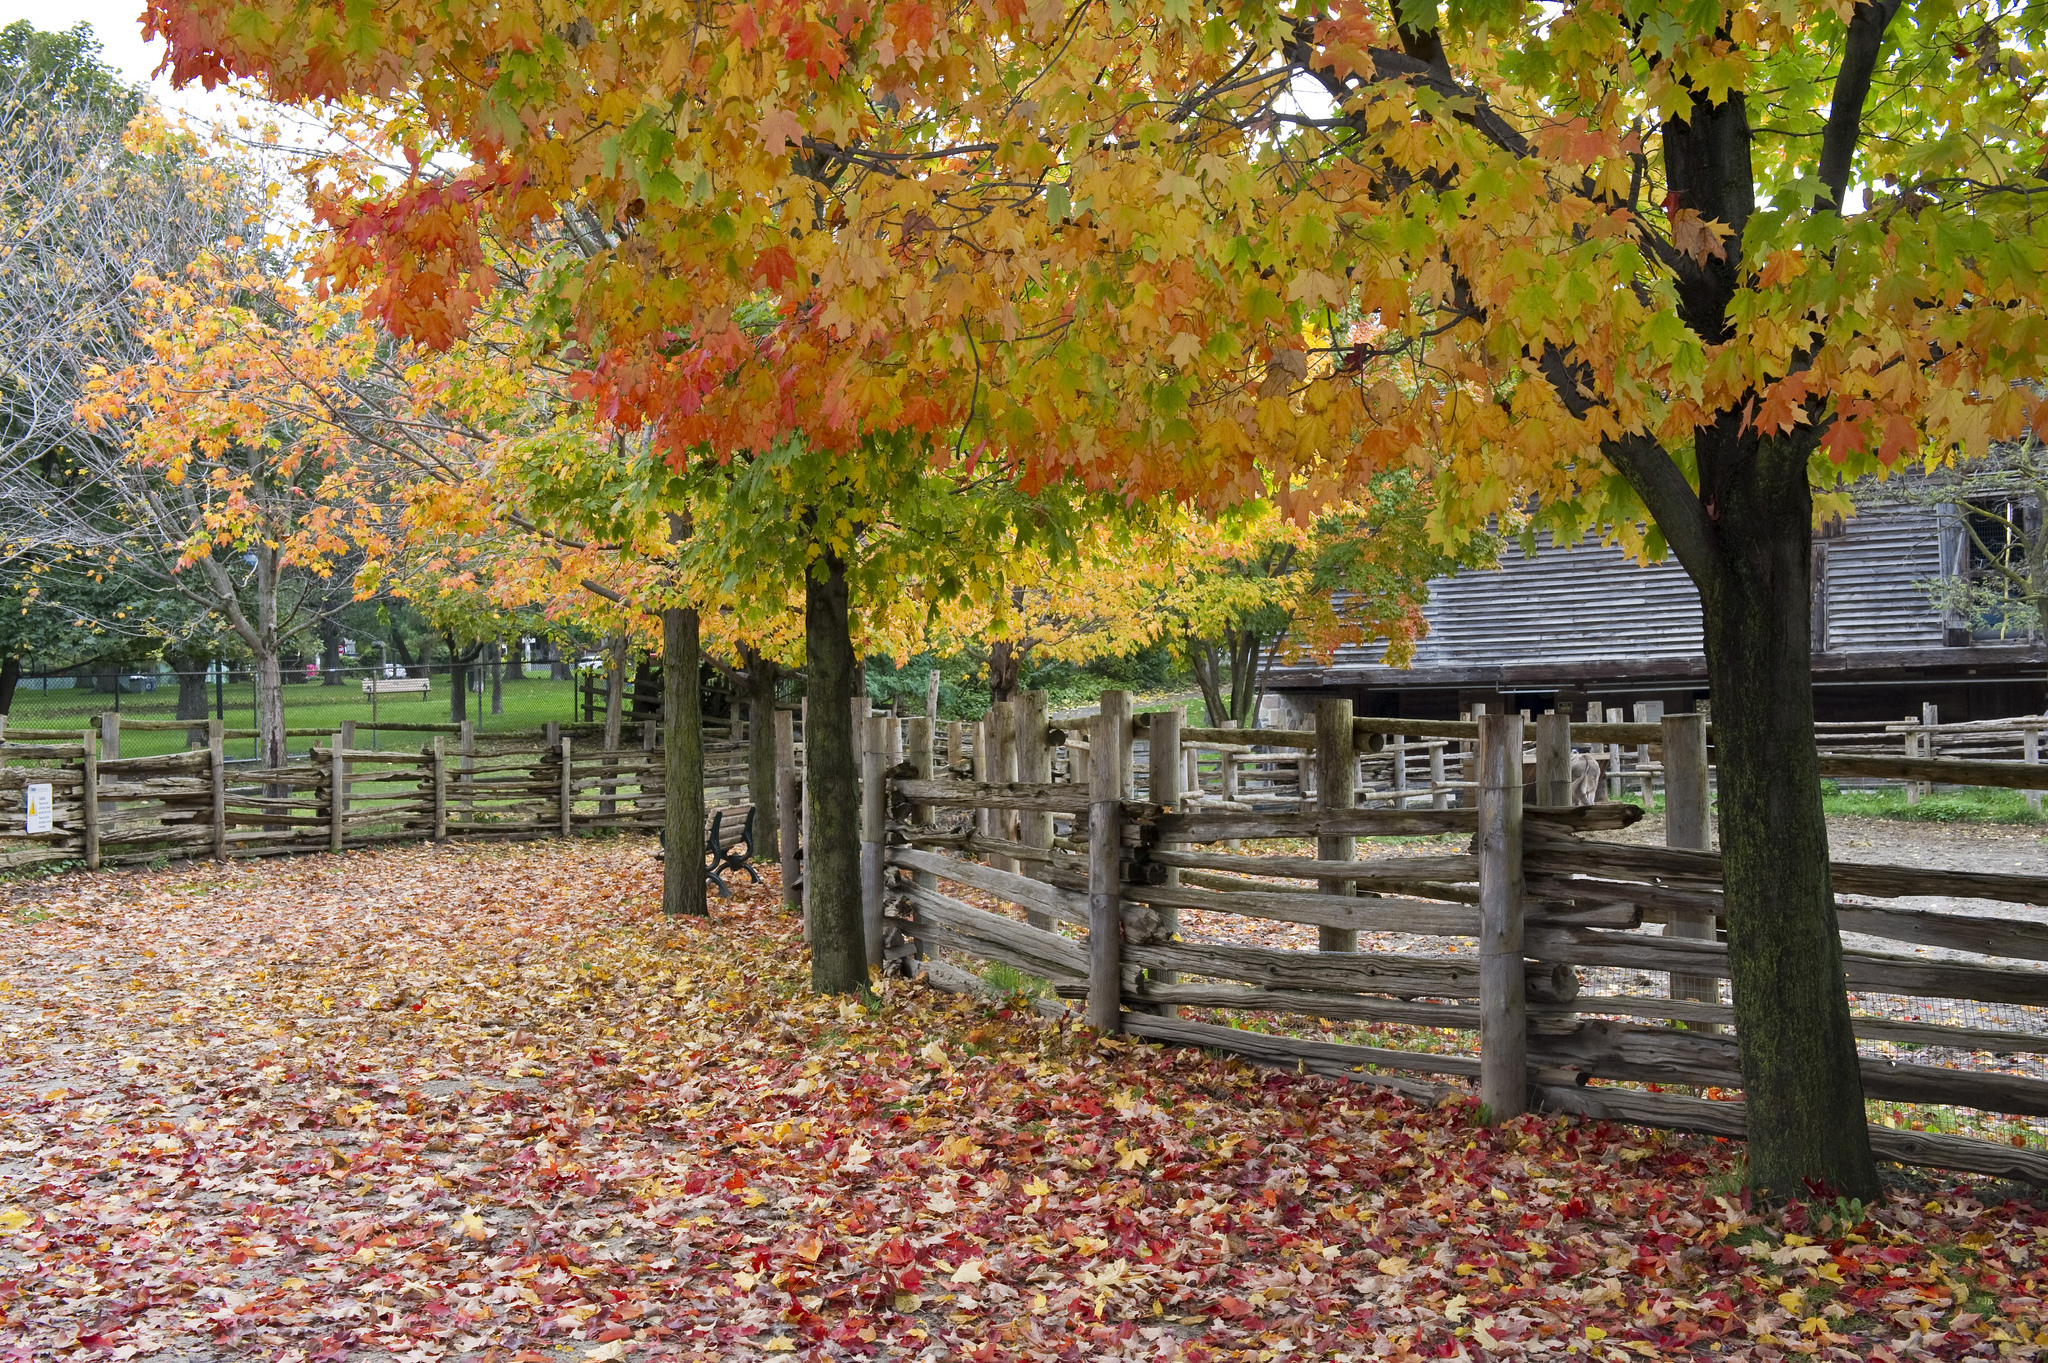 Another image of nature, this one of Riverdale Farm.